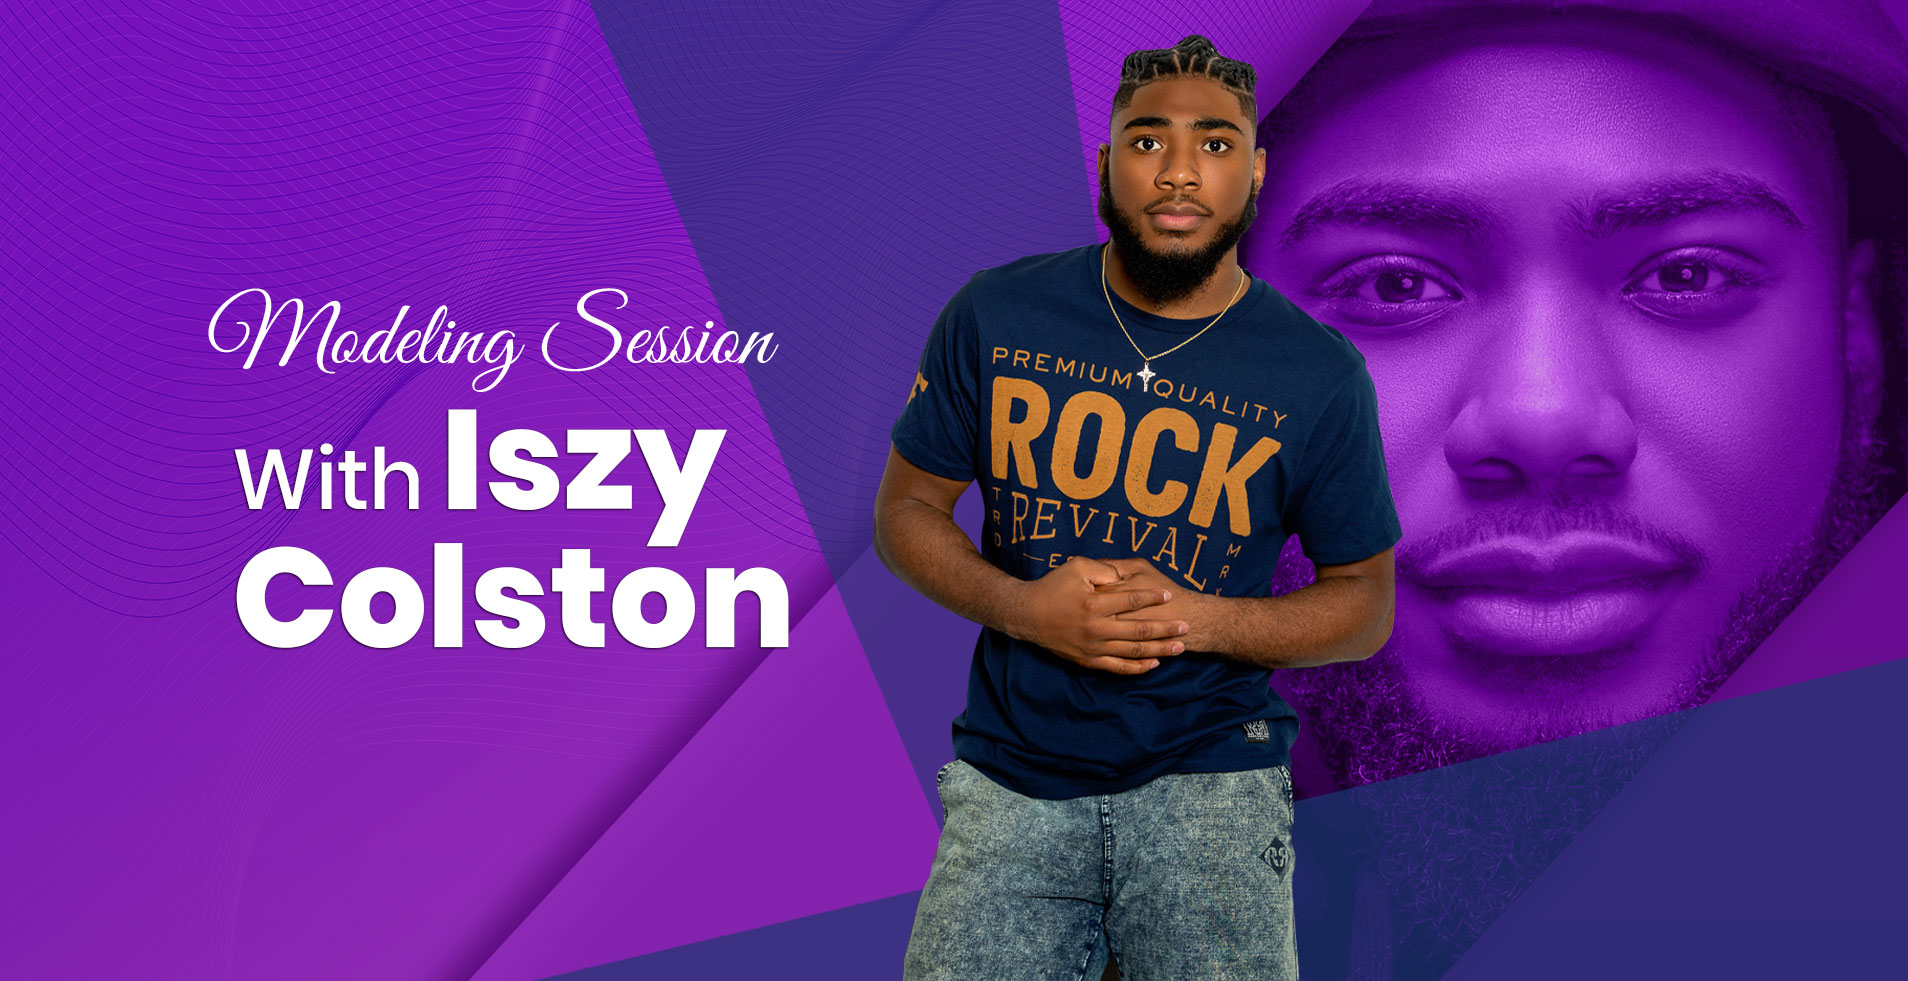 Modeling Session With Iszy Colston